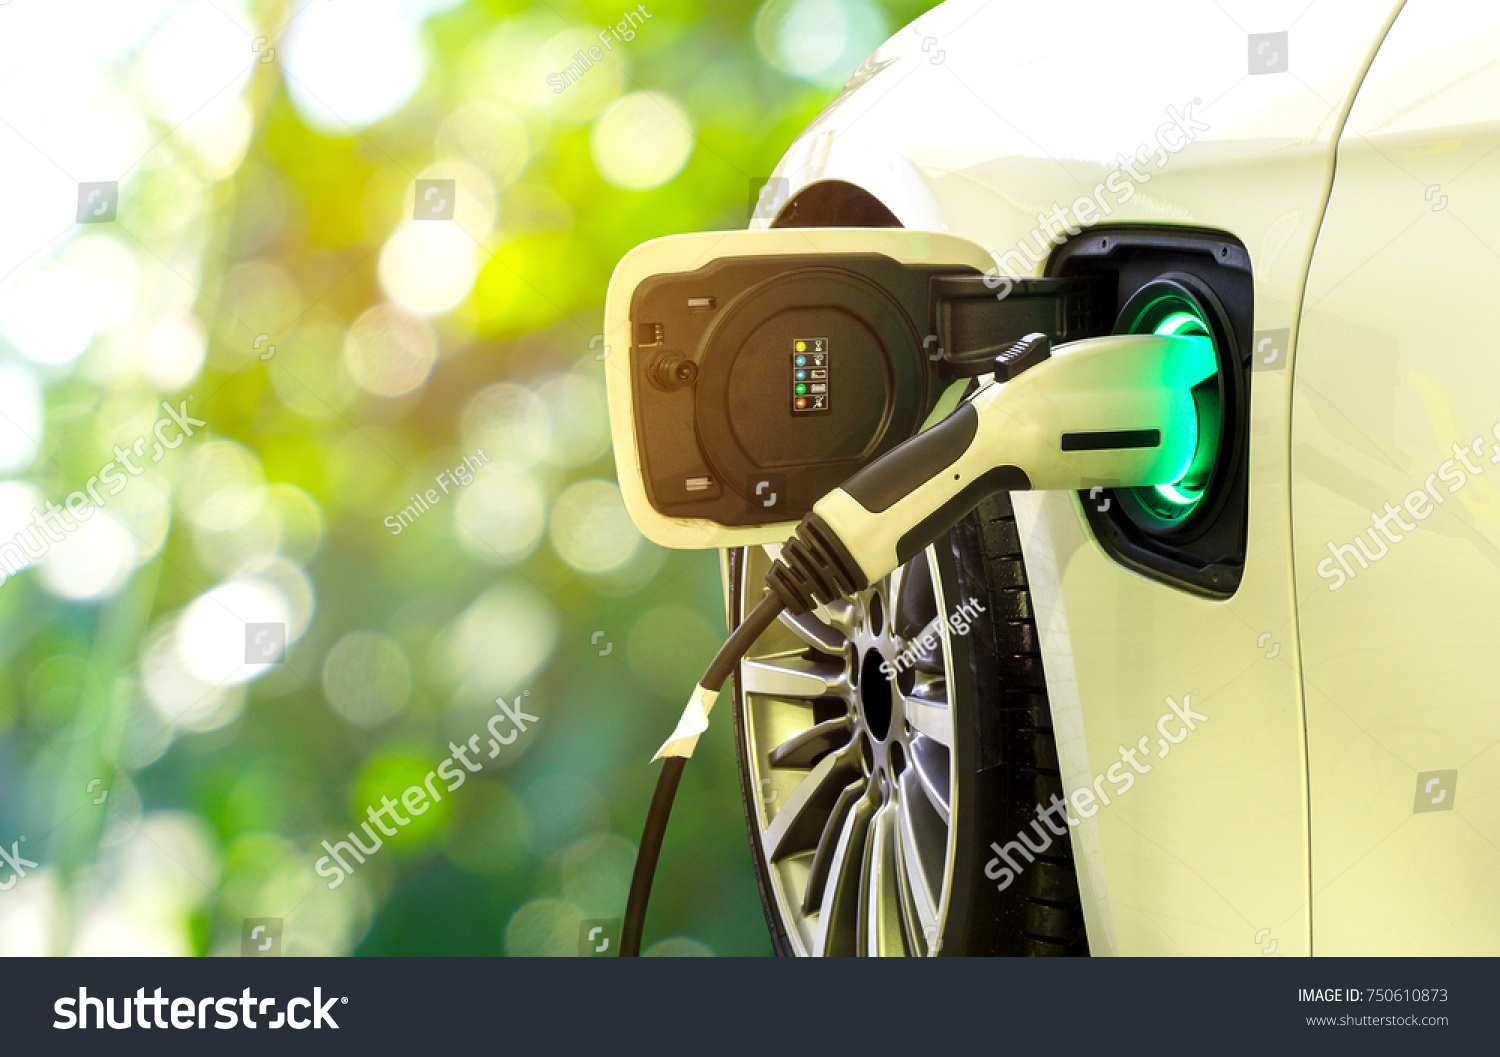 EV Car or Electric car at charging station with the power cable supply plugged in on blurred nature with soft light background. Eco-friendly alternative energy concept
 #750610873